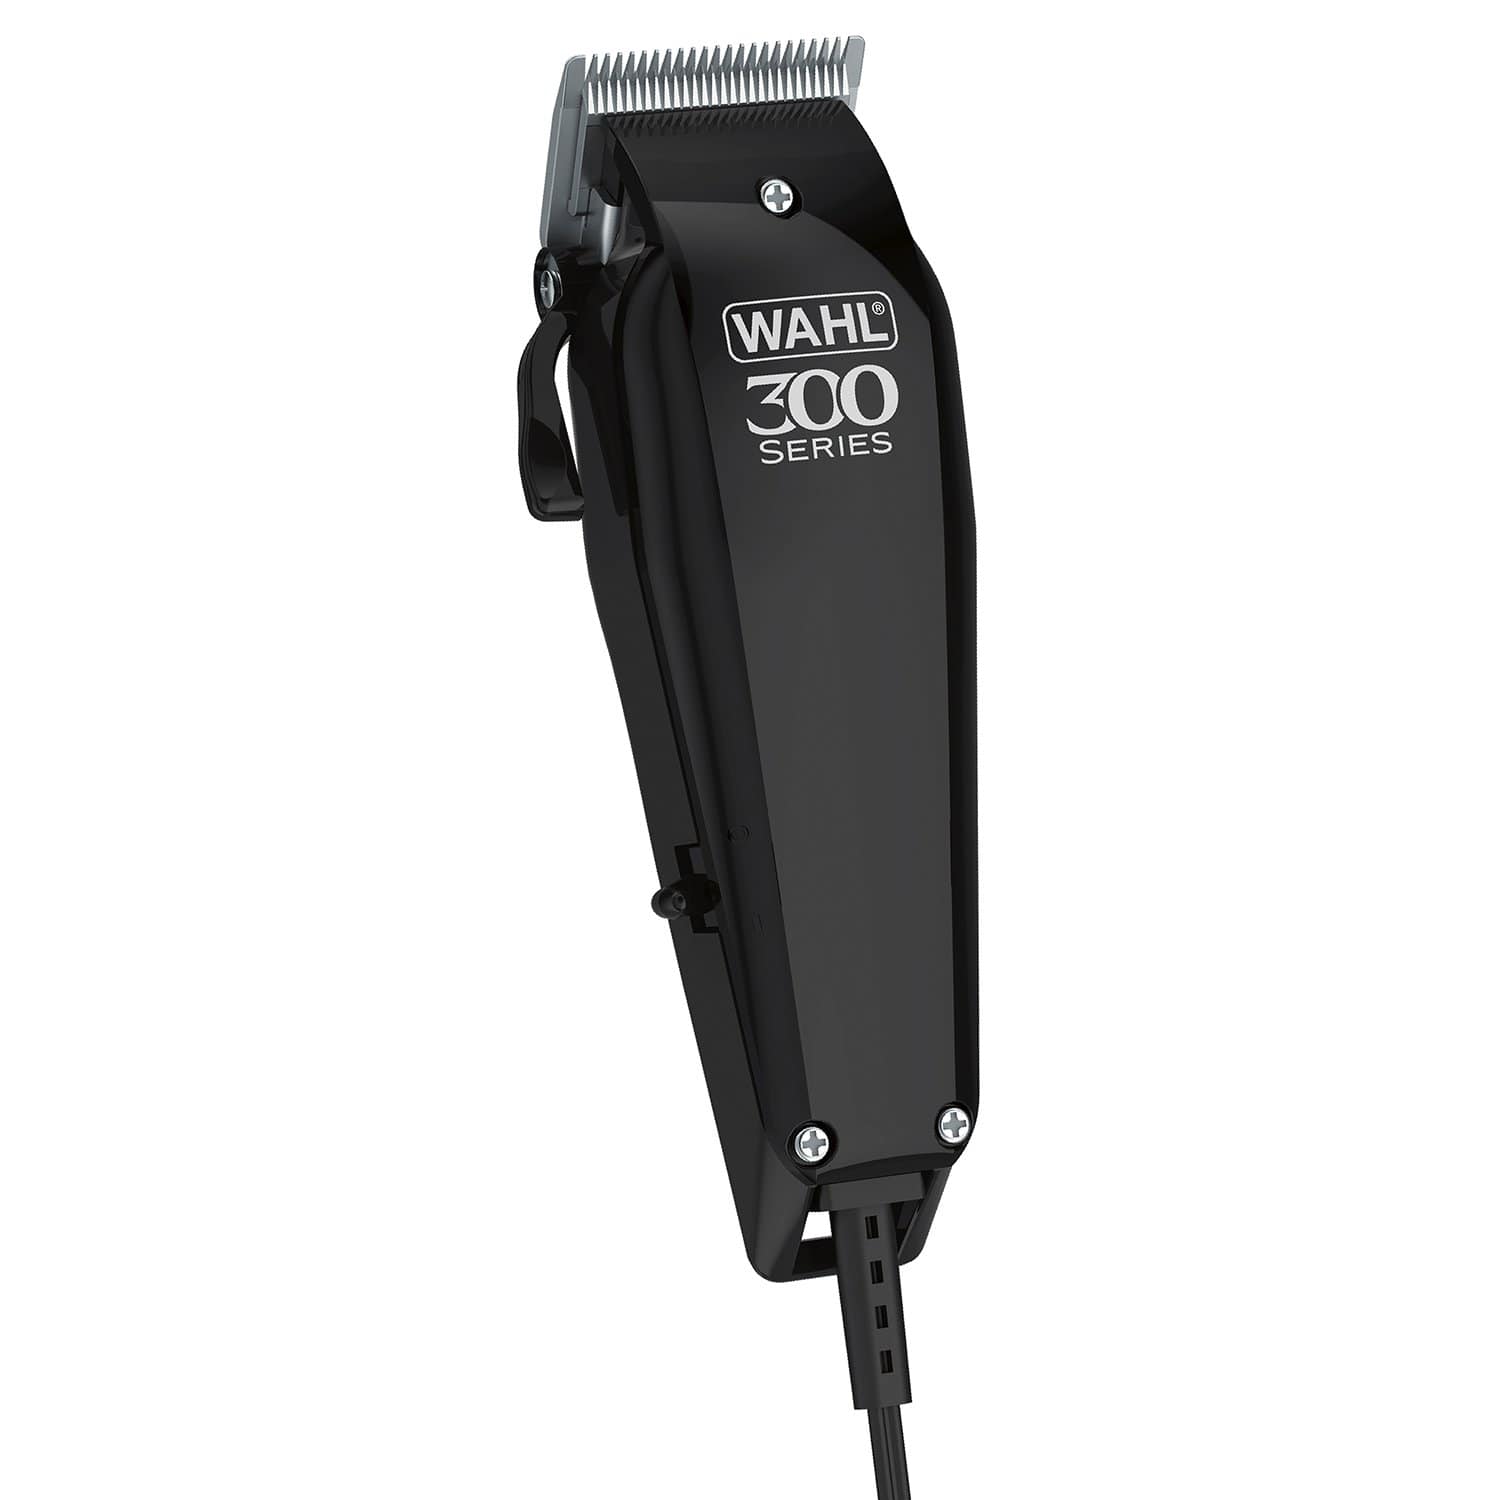 Wahl 300 Series With Handle Case - 9247-1327